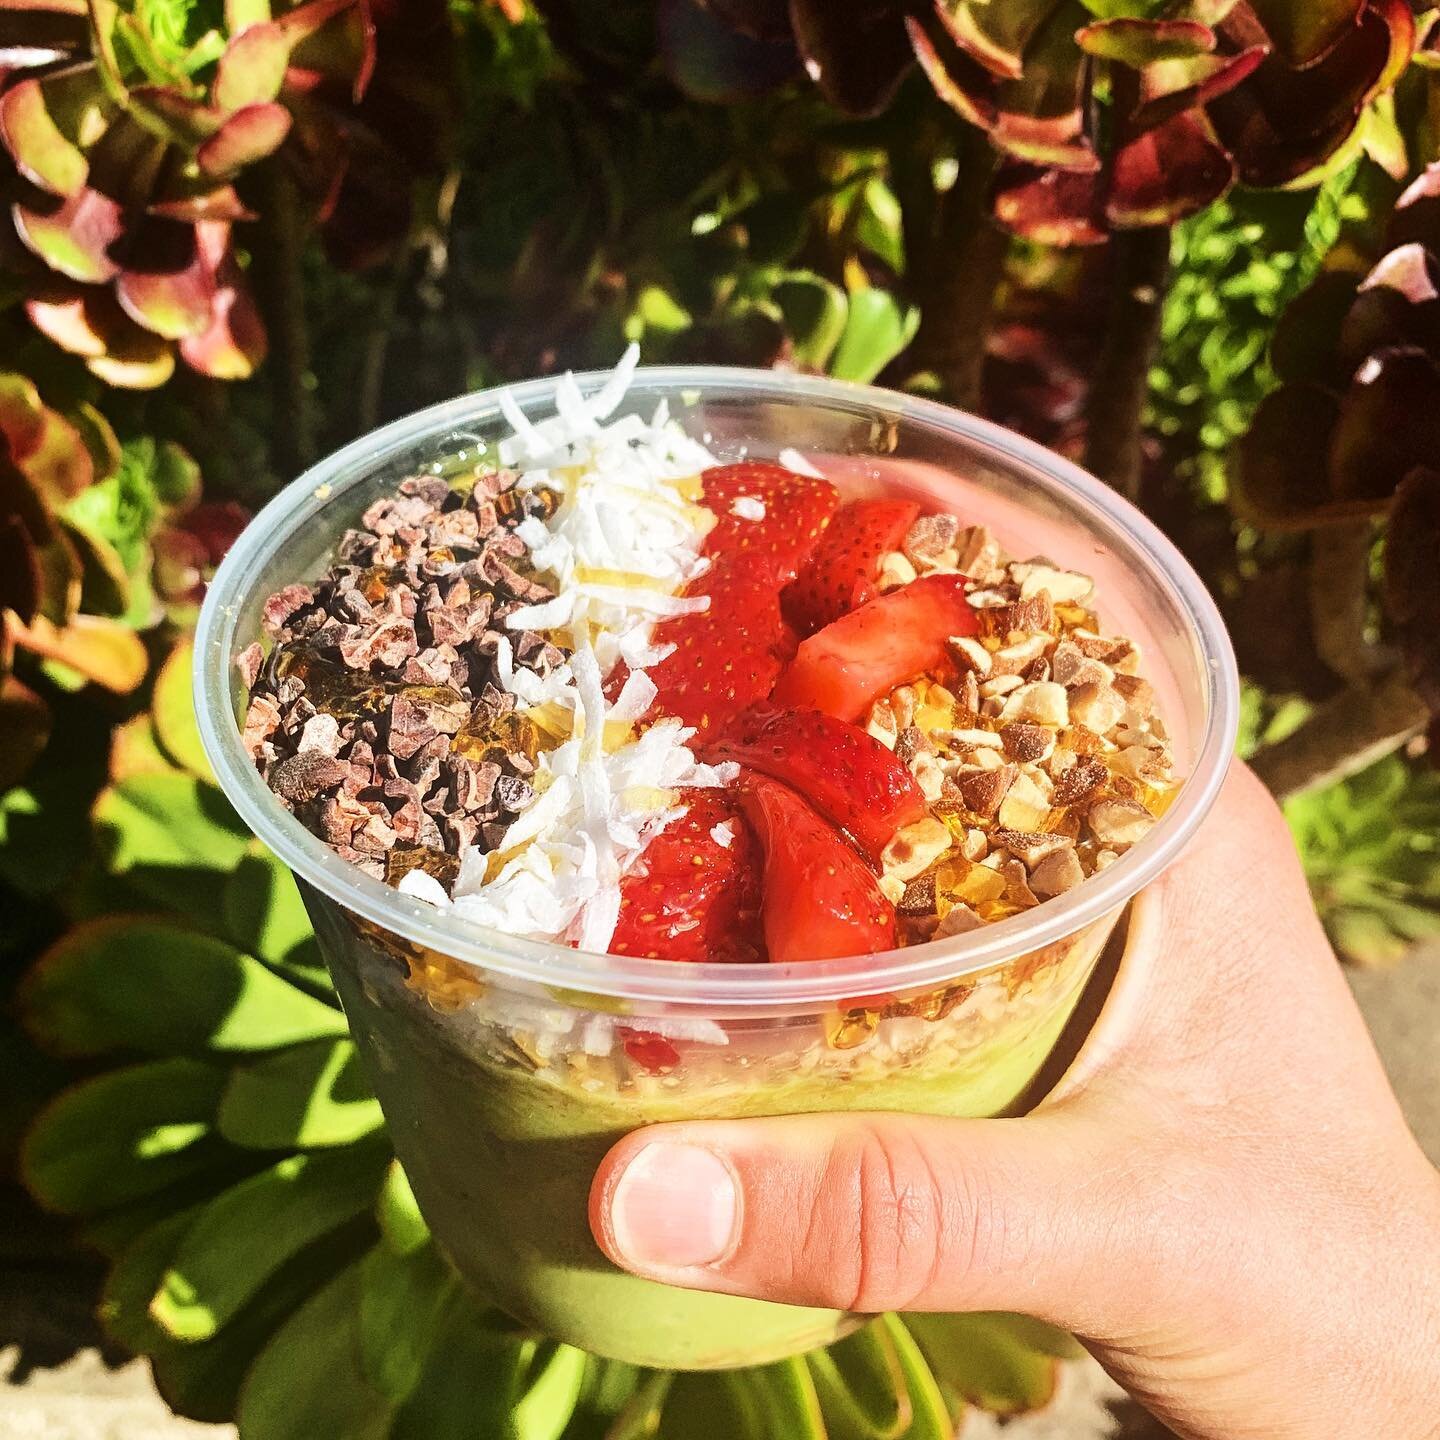 Have you tried our NEW matcha bowl?! It&rsquo;s perfect for Spring and St. Paddy&rsquo;s Day! See you soon! ☘️
.
.
.
#morrorock #morrobay #matcha #superfoods #beach #spring #stpatricksday #california #acaibowl #kravabowl #surf #surfer #surfing #longb